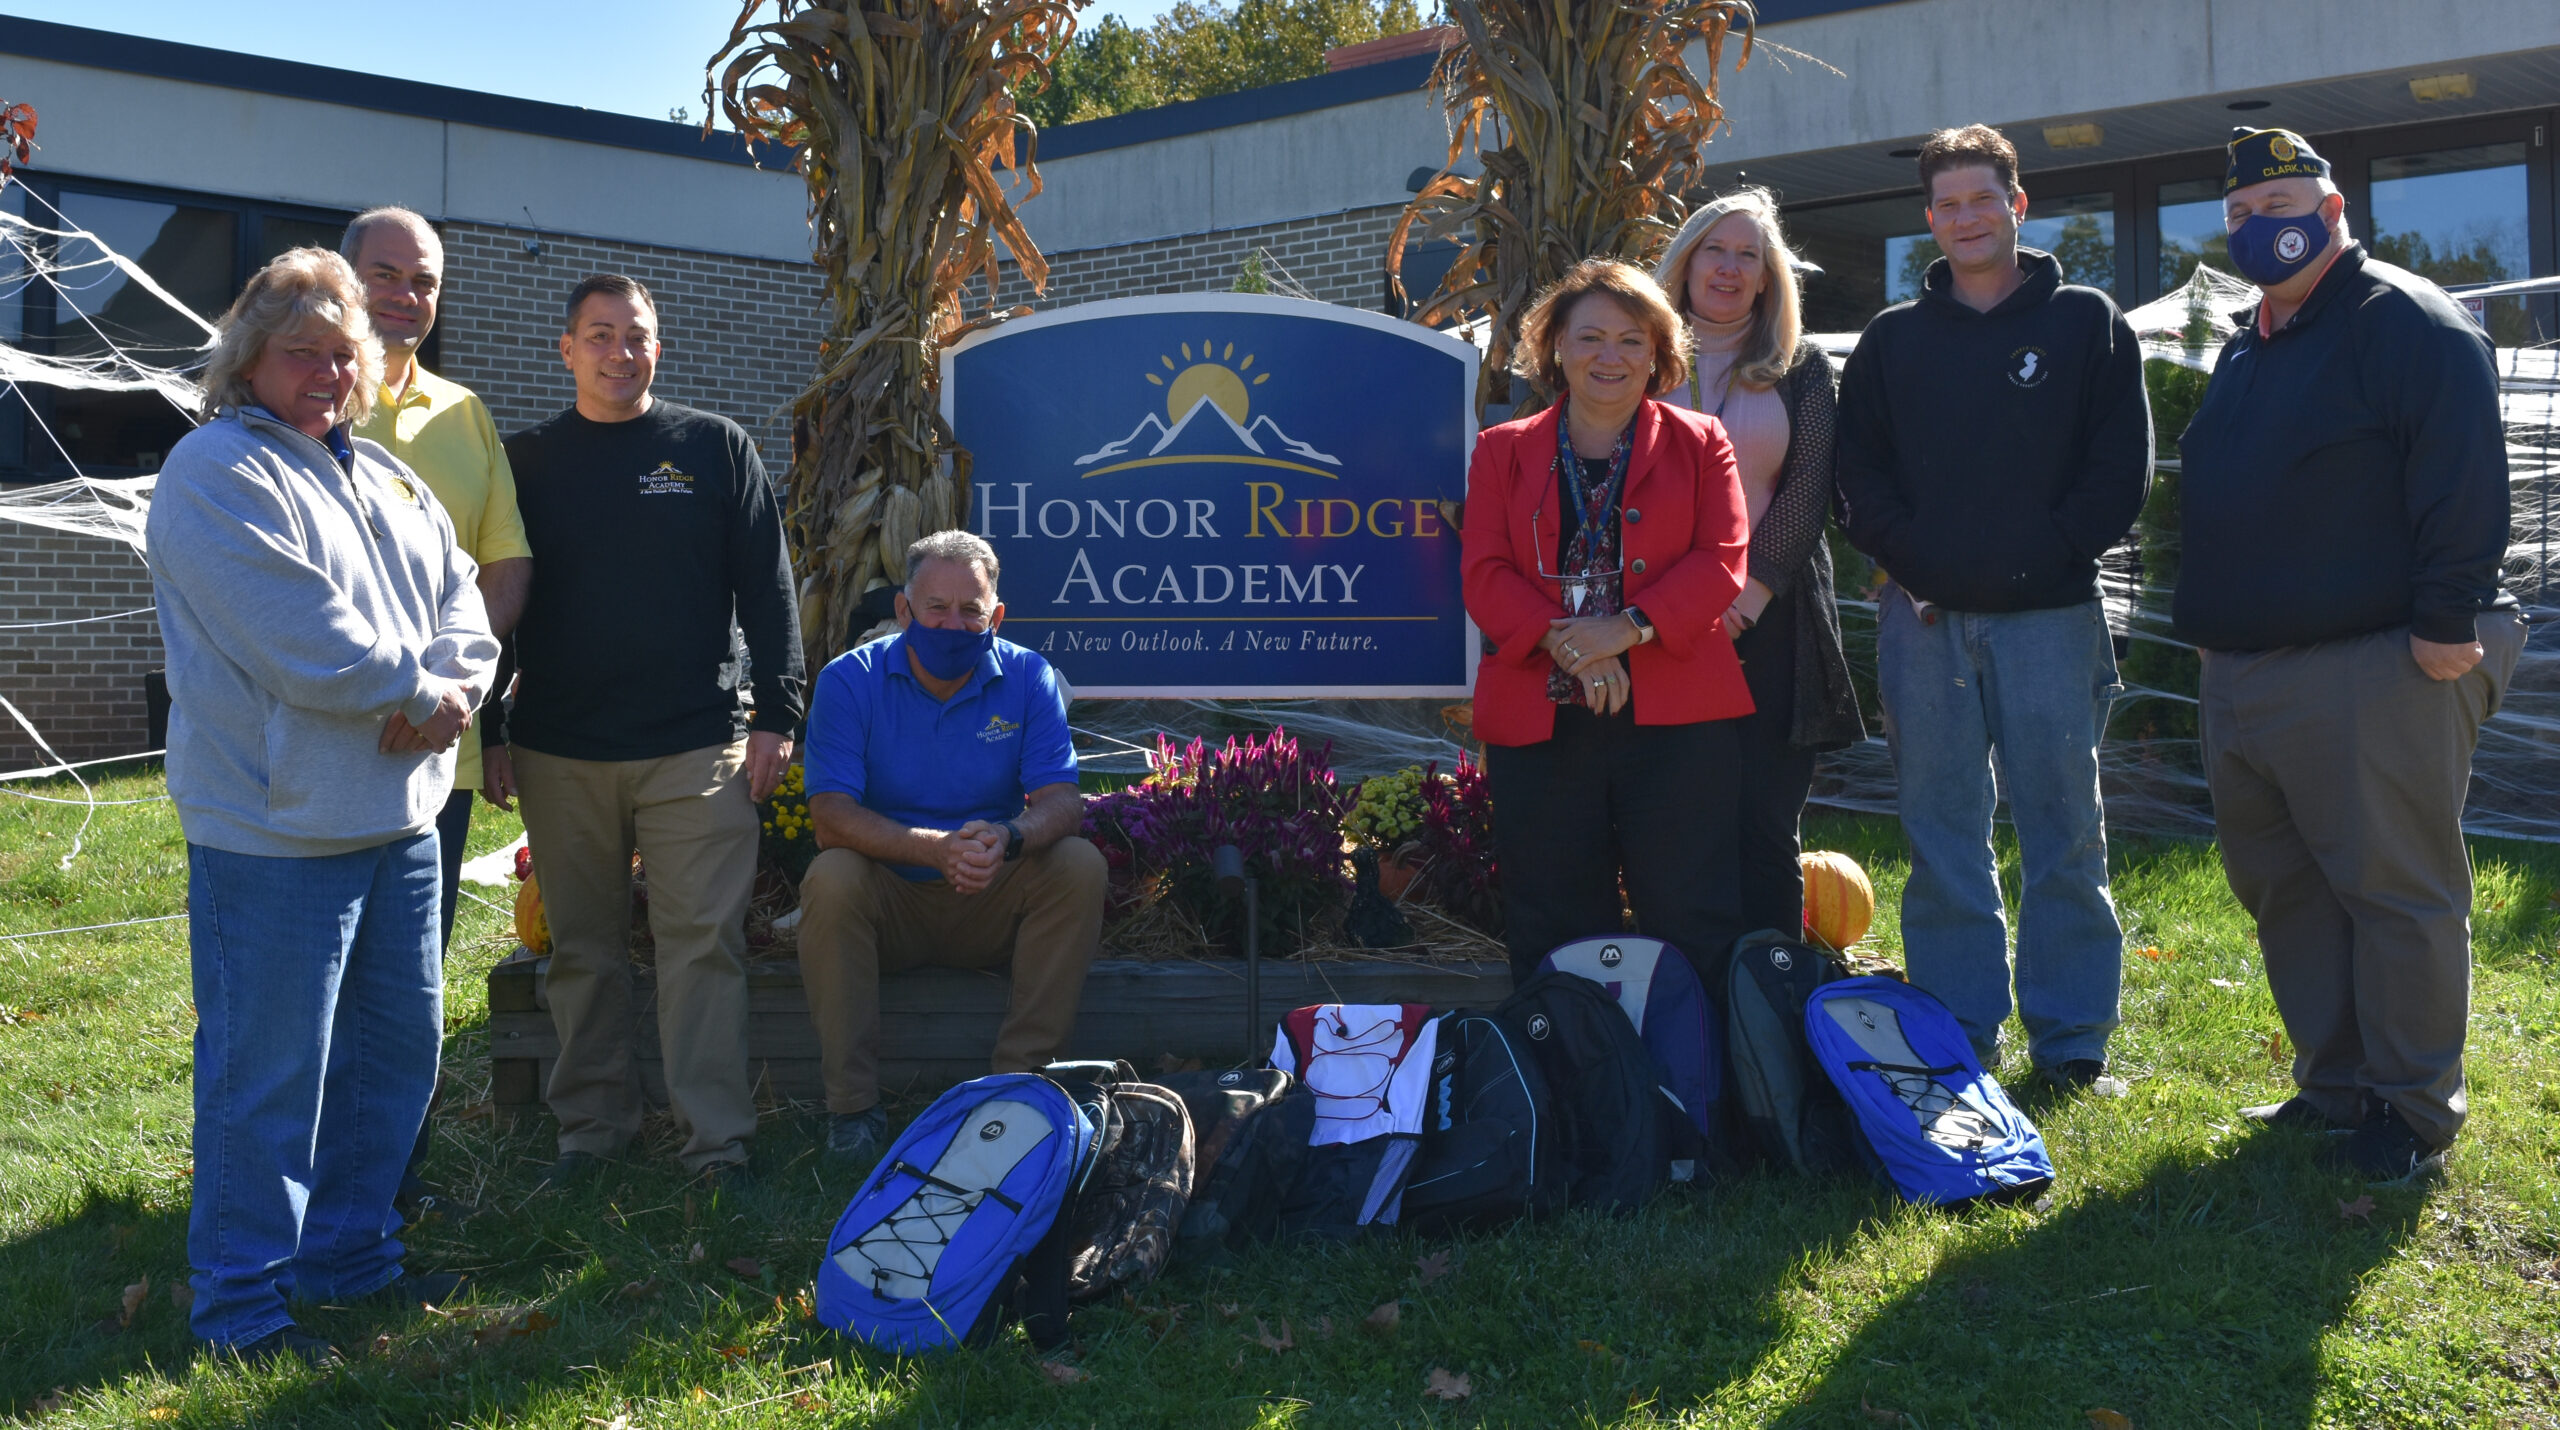 outdoor group photo of HRA staff and supporters involved in the backpack drive standing with the school sign